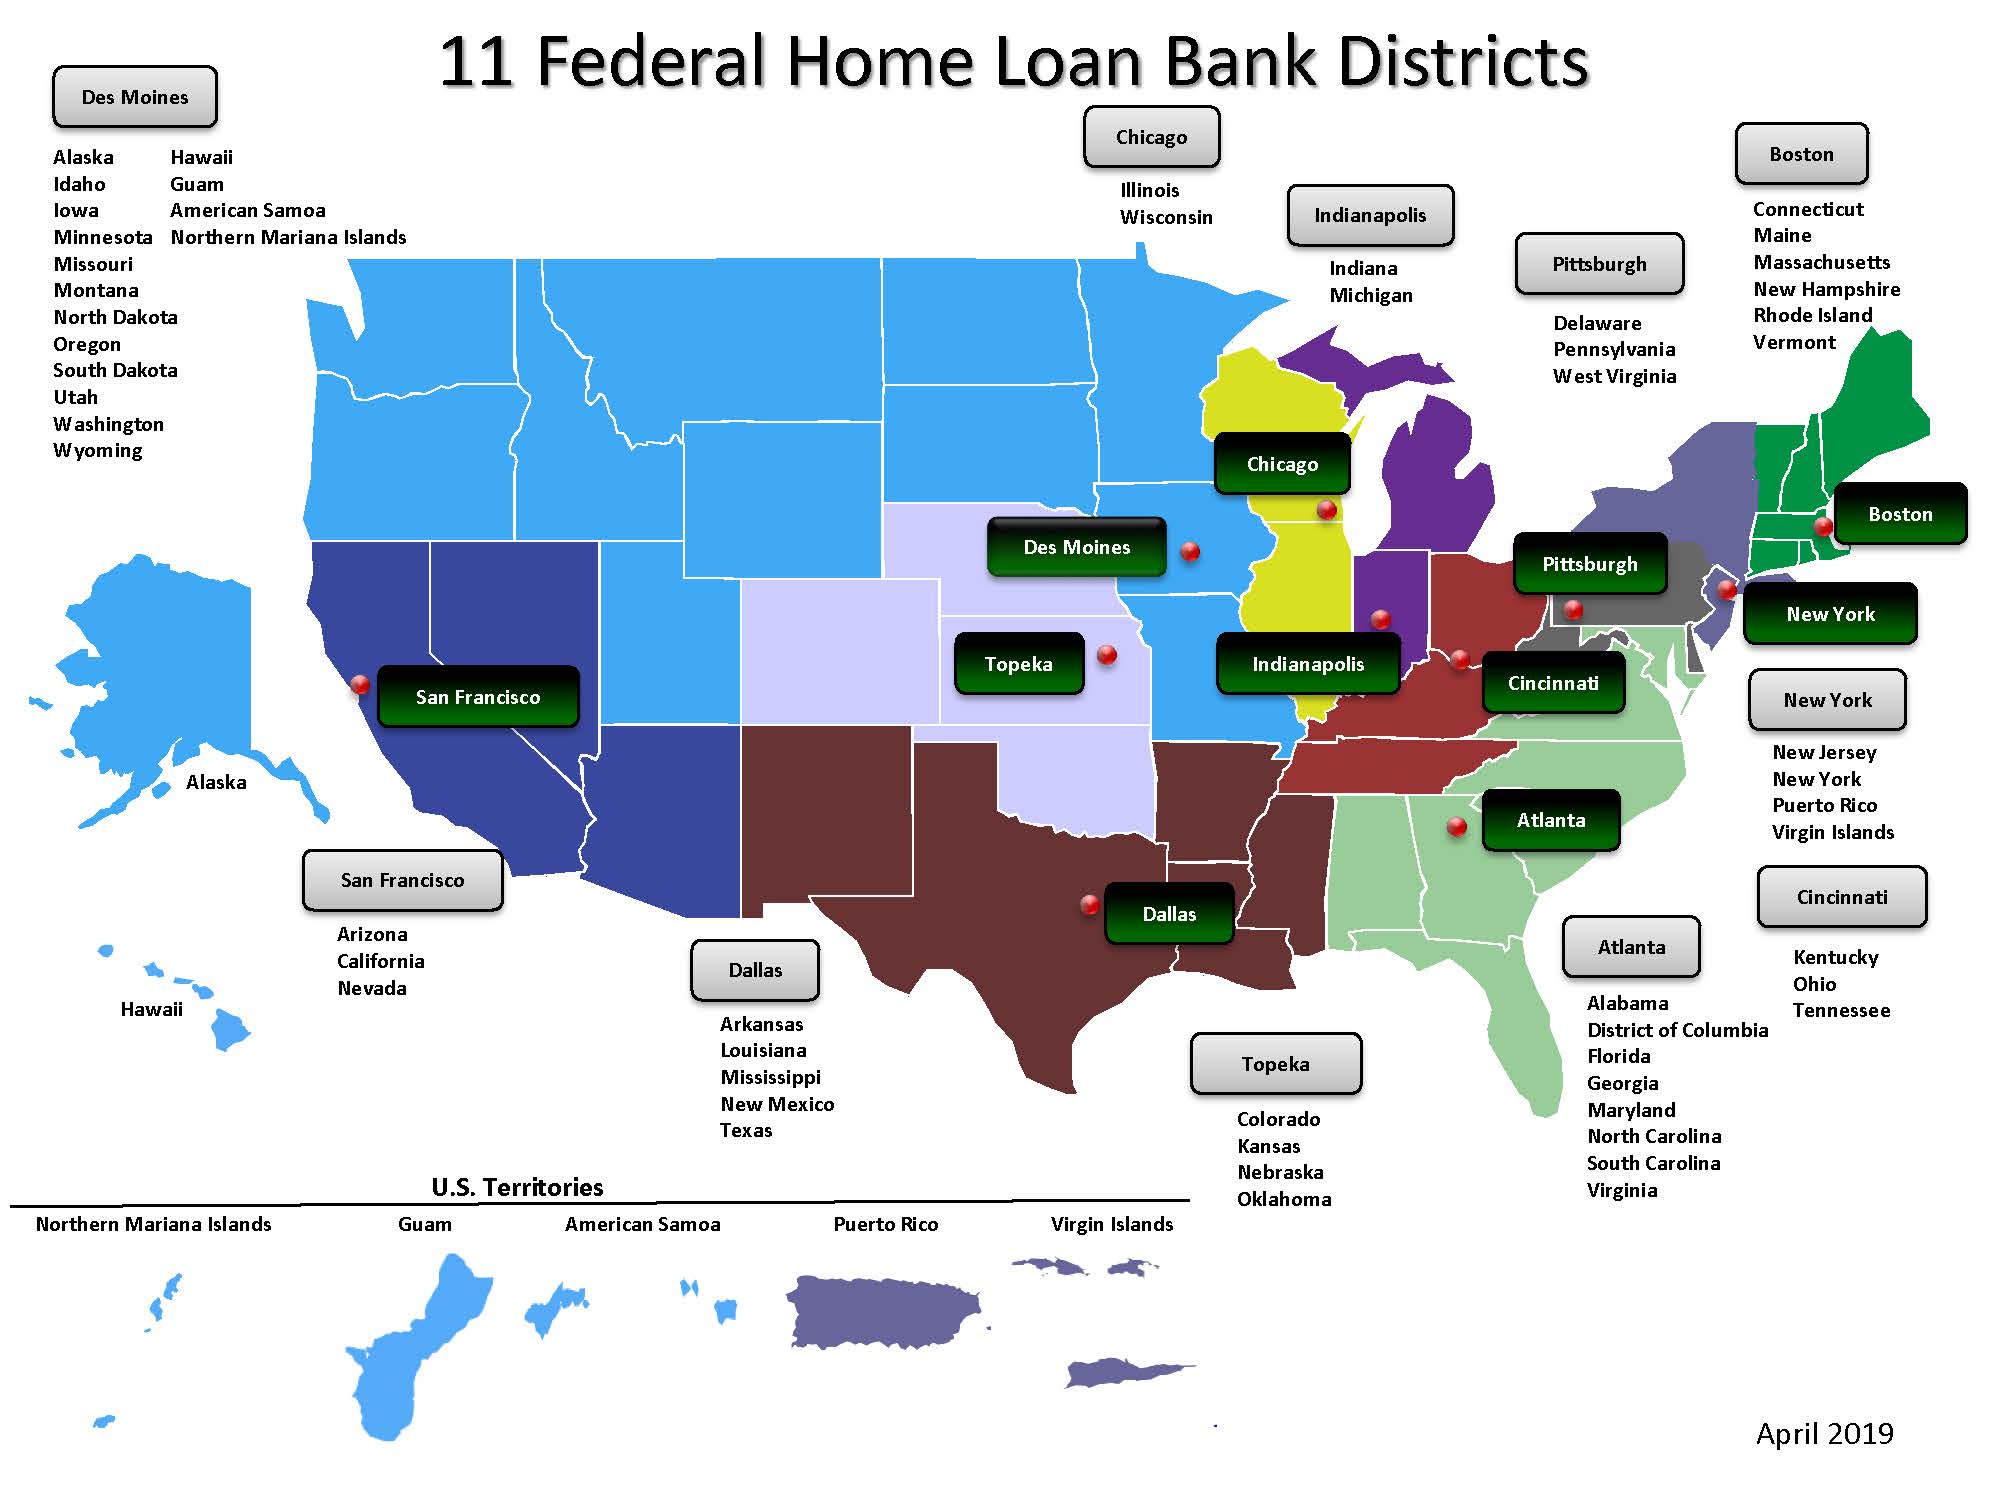 11 FHLBank Districts